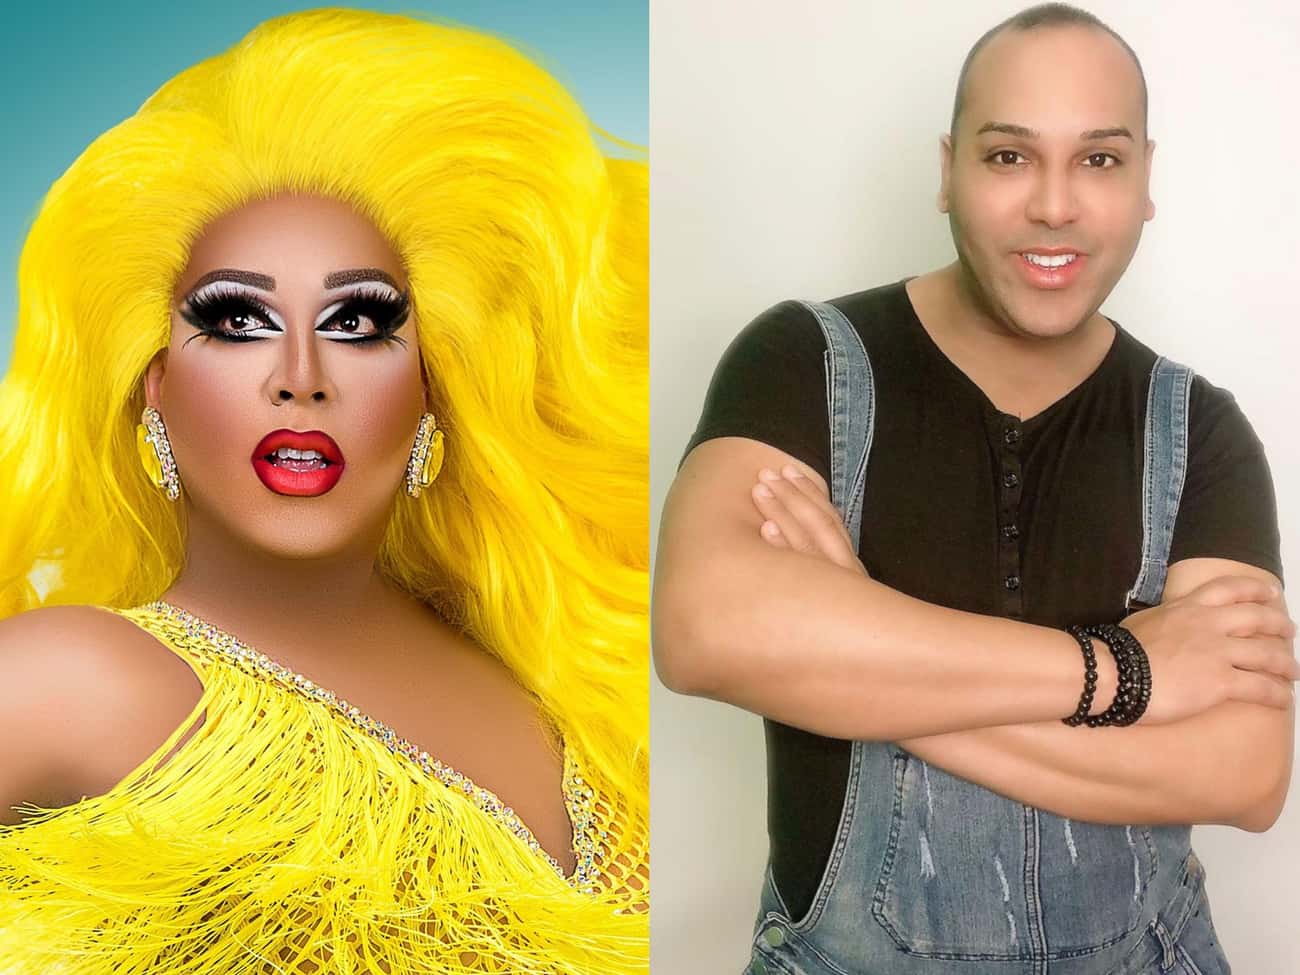 Alexis Mateo Knows How To Party With Or Without Makeup